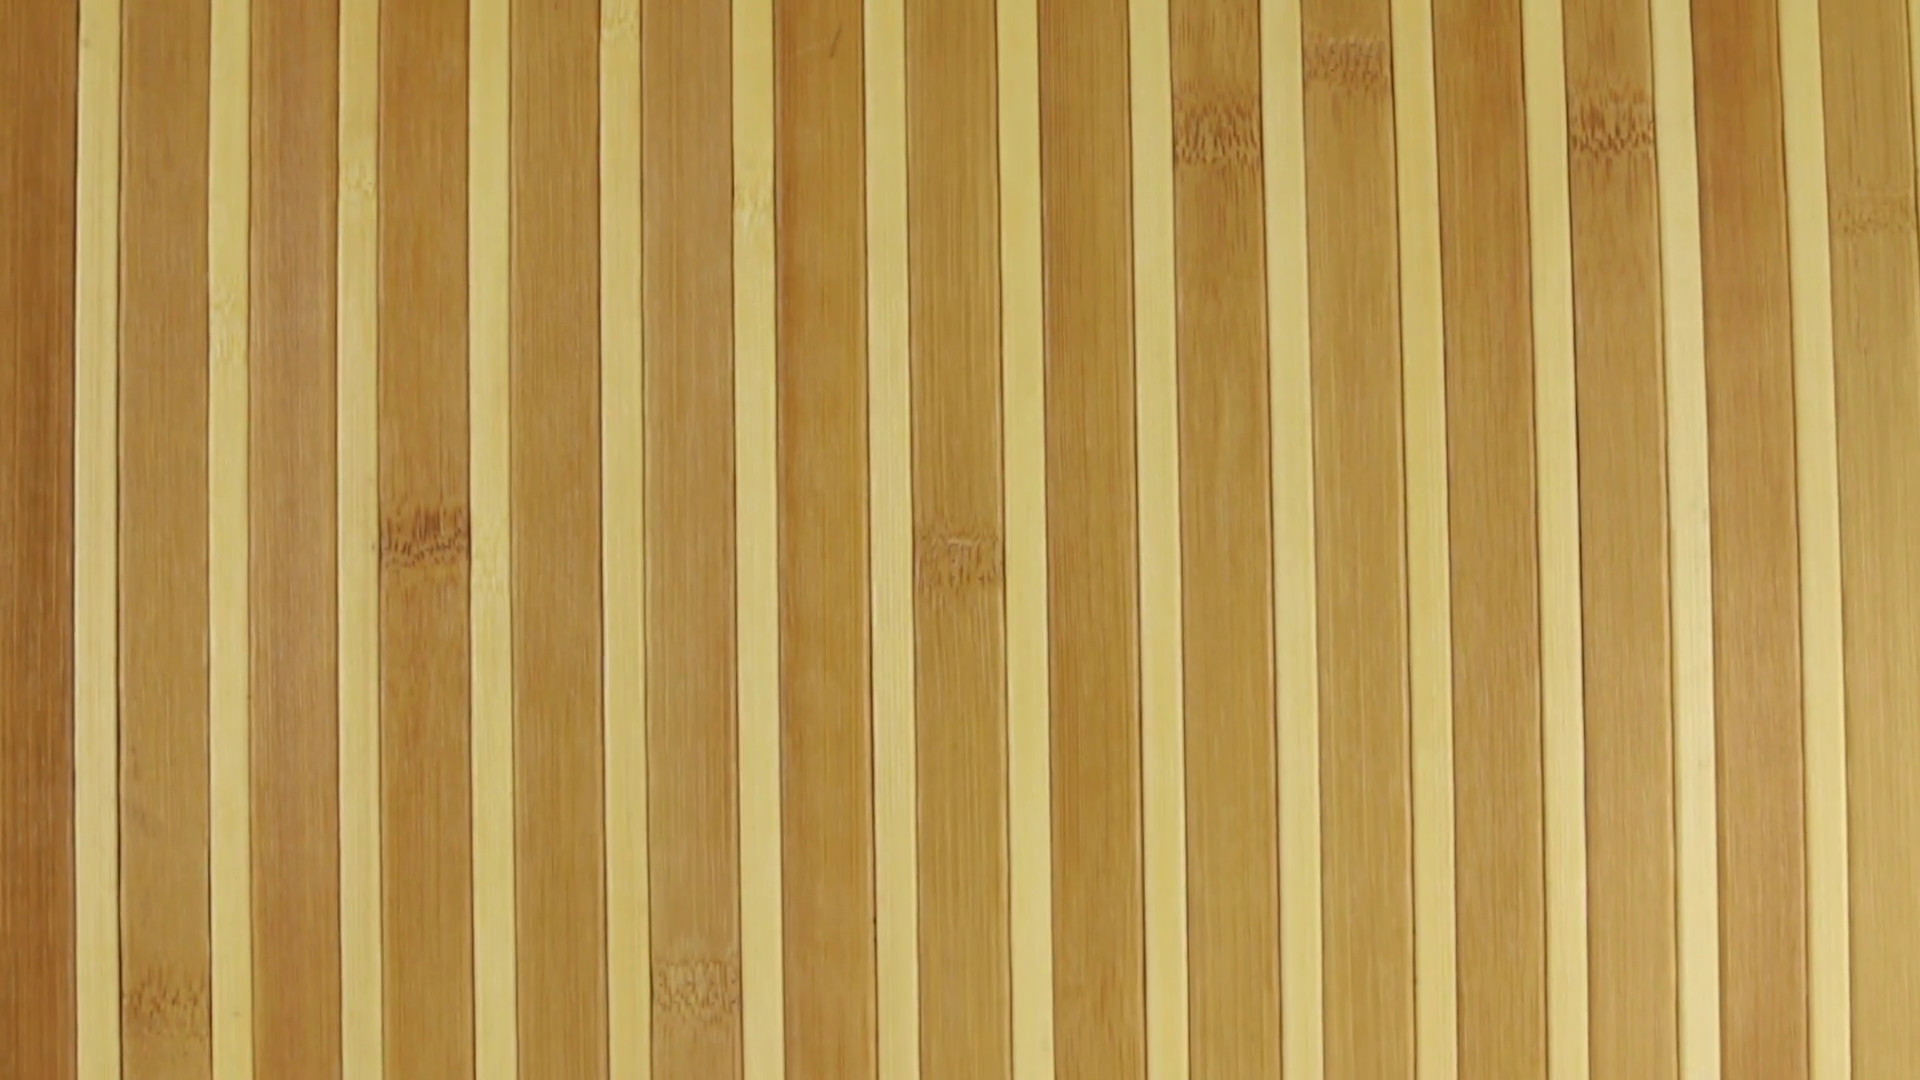 1920x1080 Zoom bamboo mat, background texture for design. Stock Video Footage -  VideoBlocks